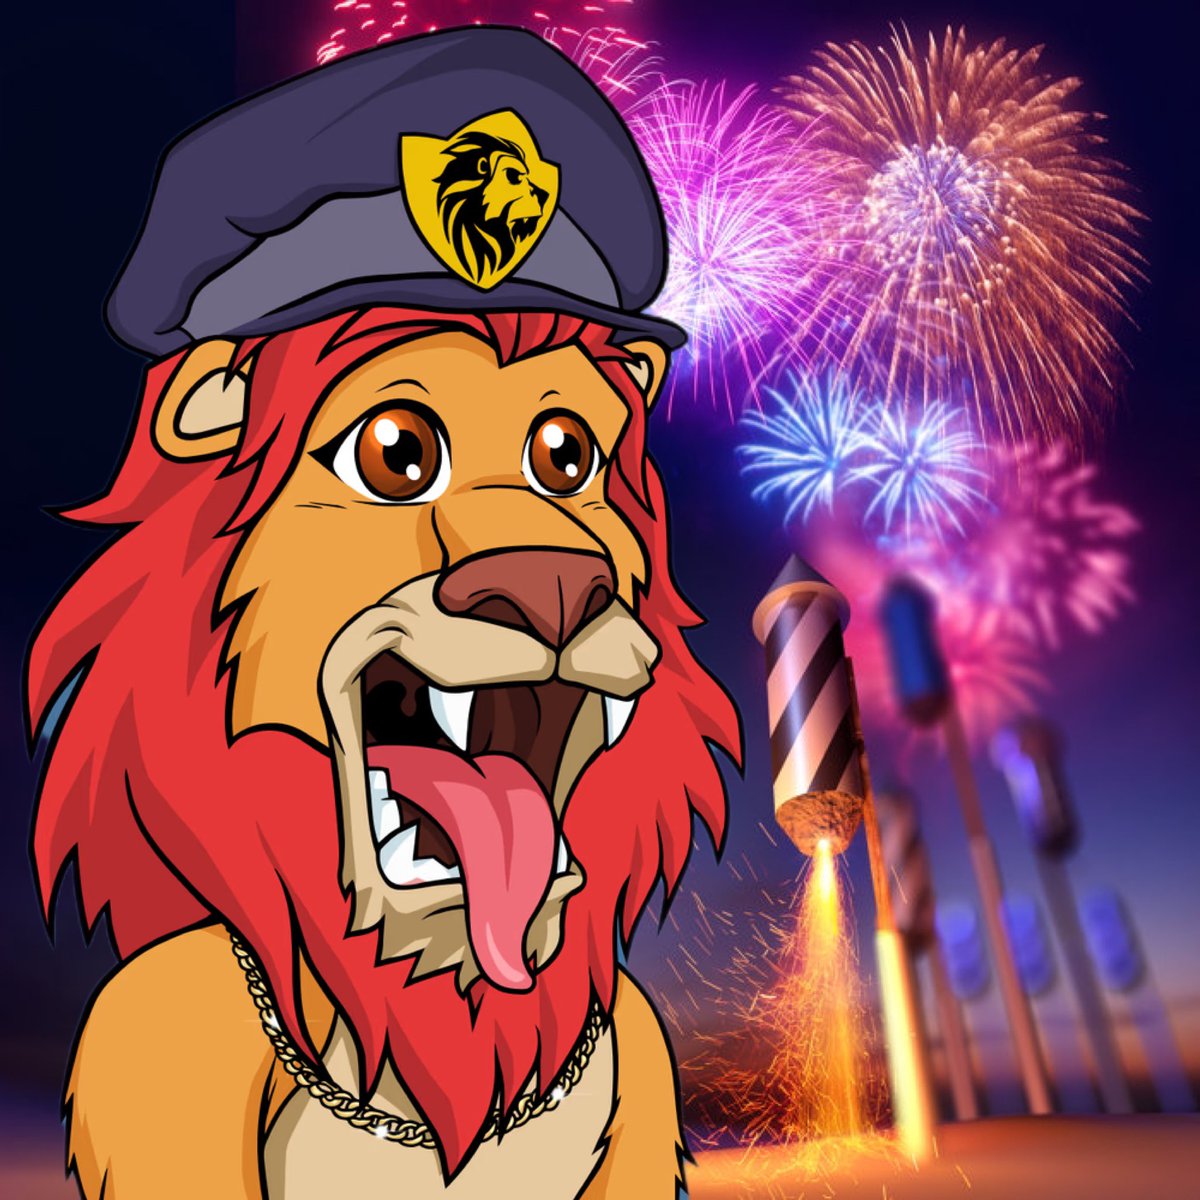 Happy #4thofJulyWeekend 💥 to the entire @LazyLionsNFT pride! 🦁 Stay safe & enjoy time with family & friends. 🇺🇸